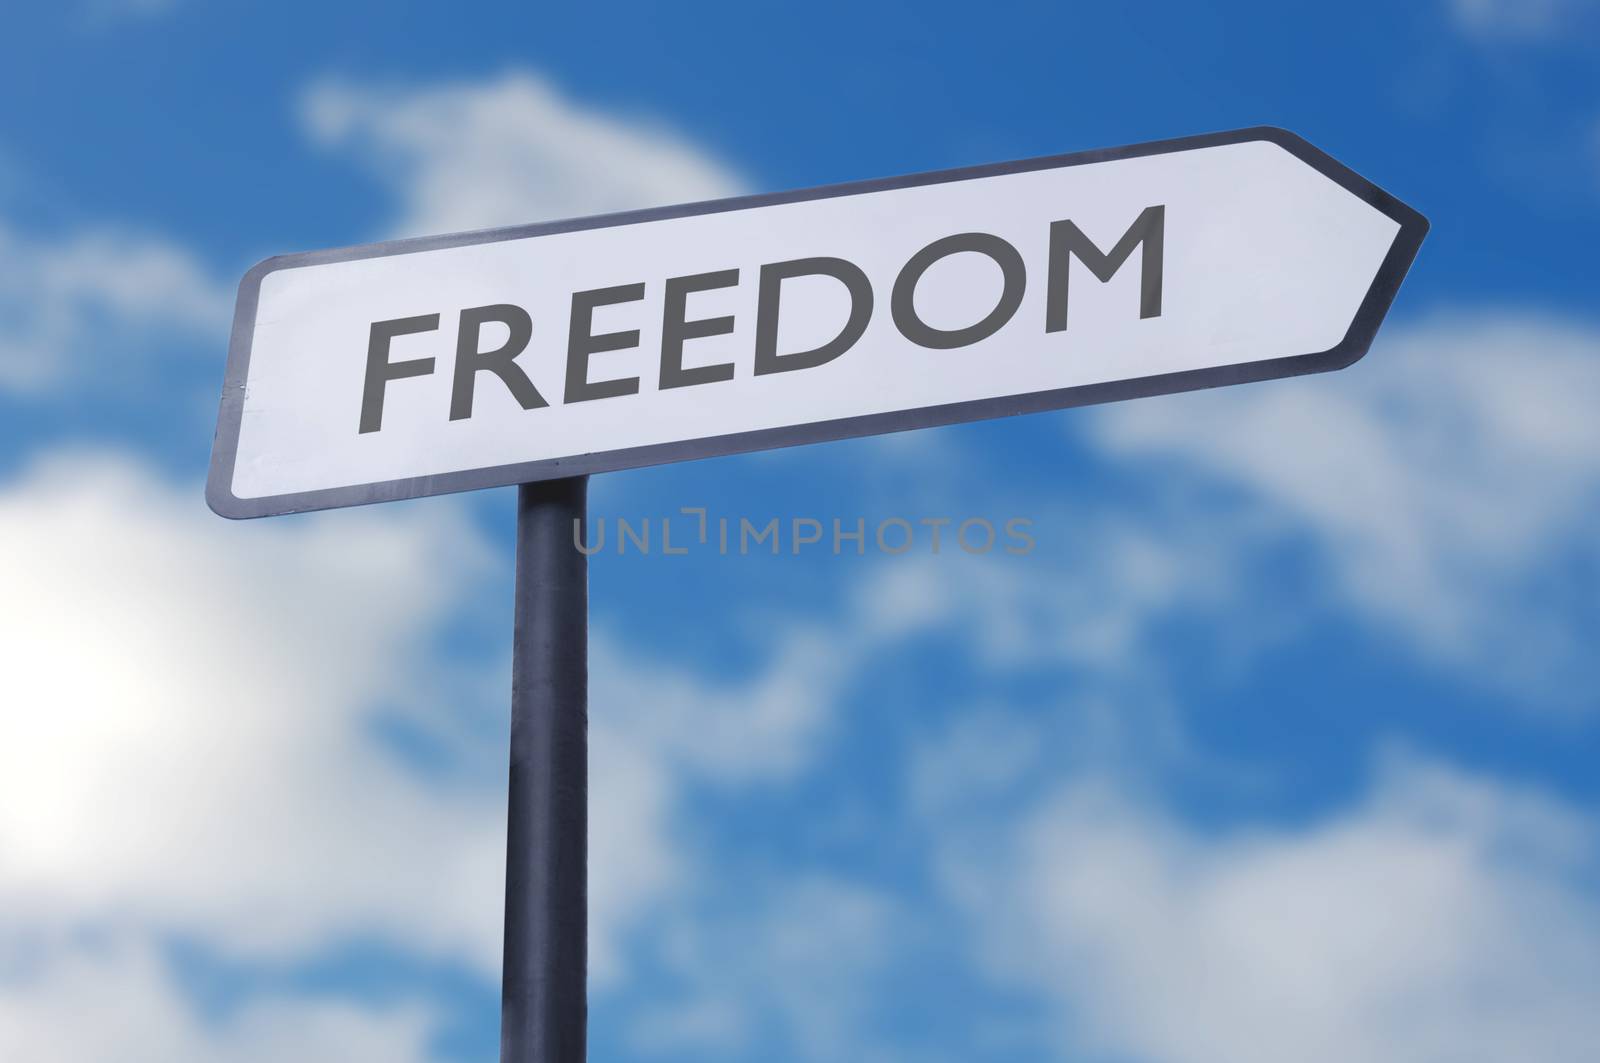 Street sign pointing to freedom 